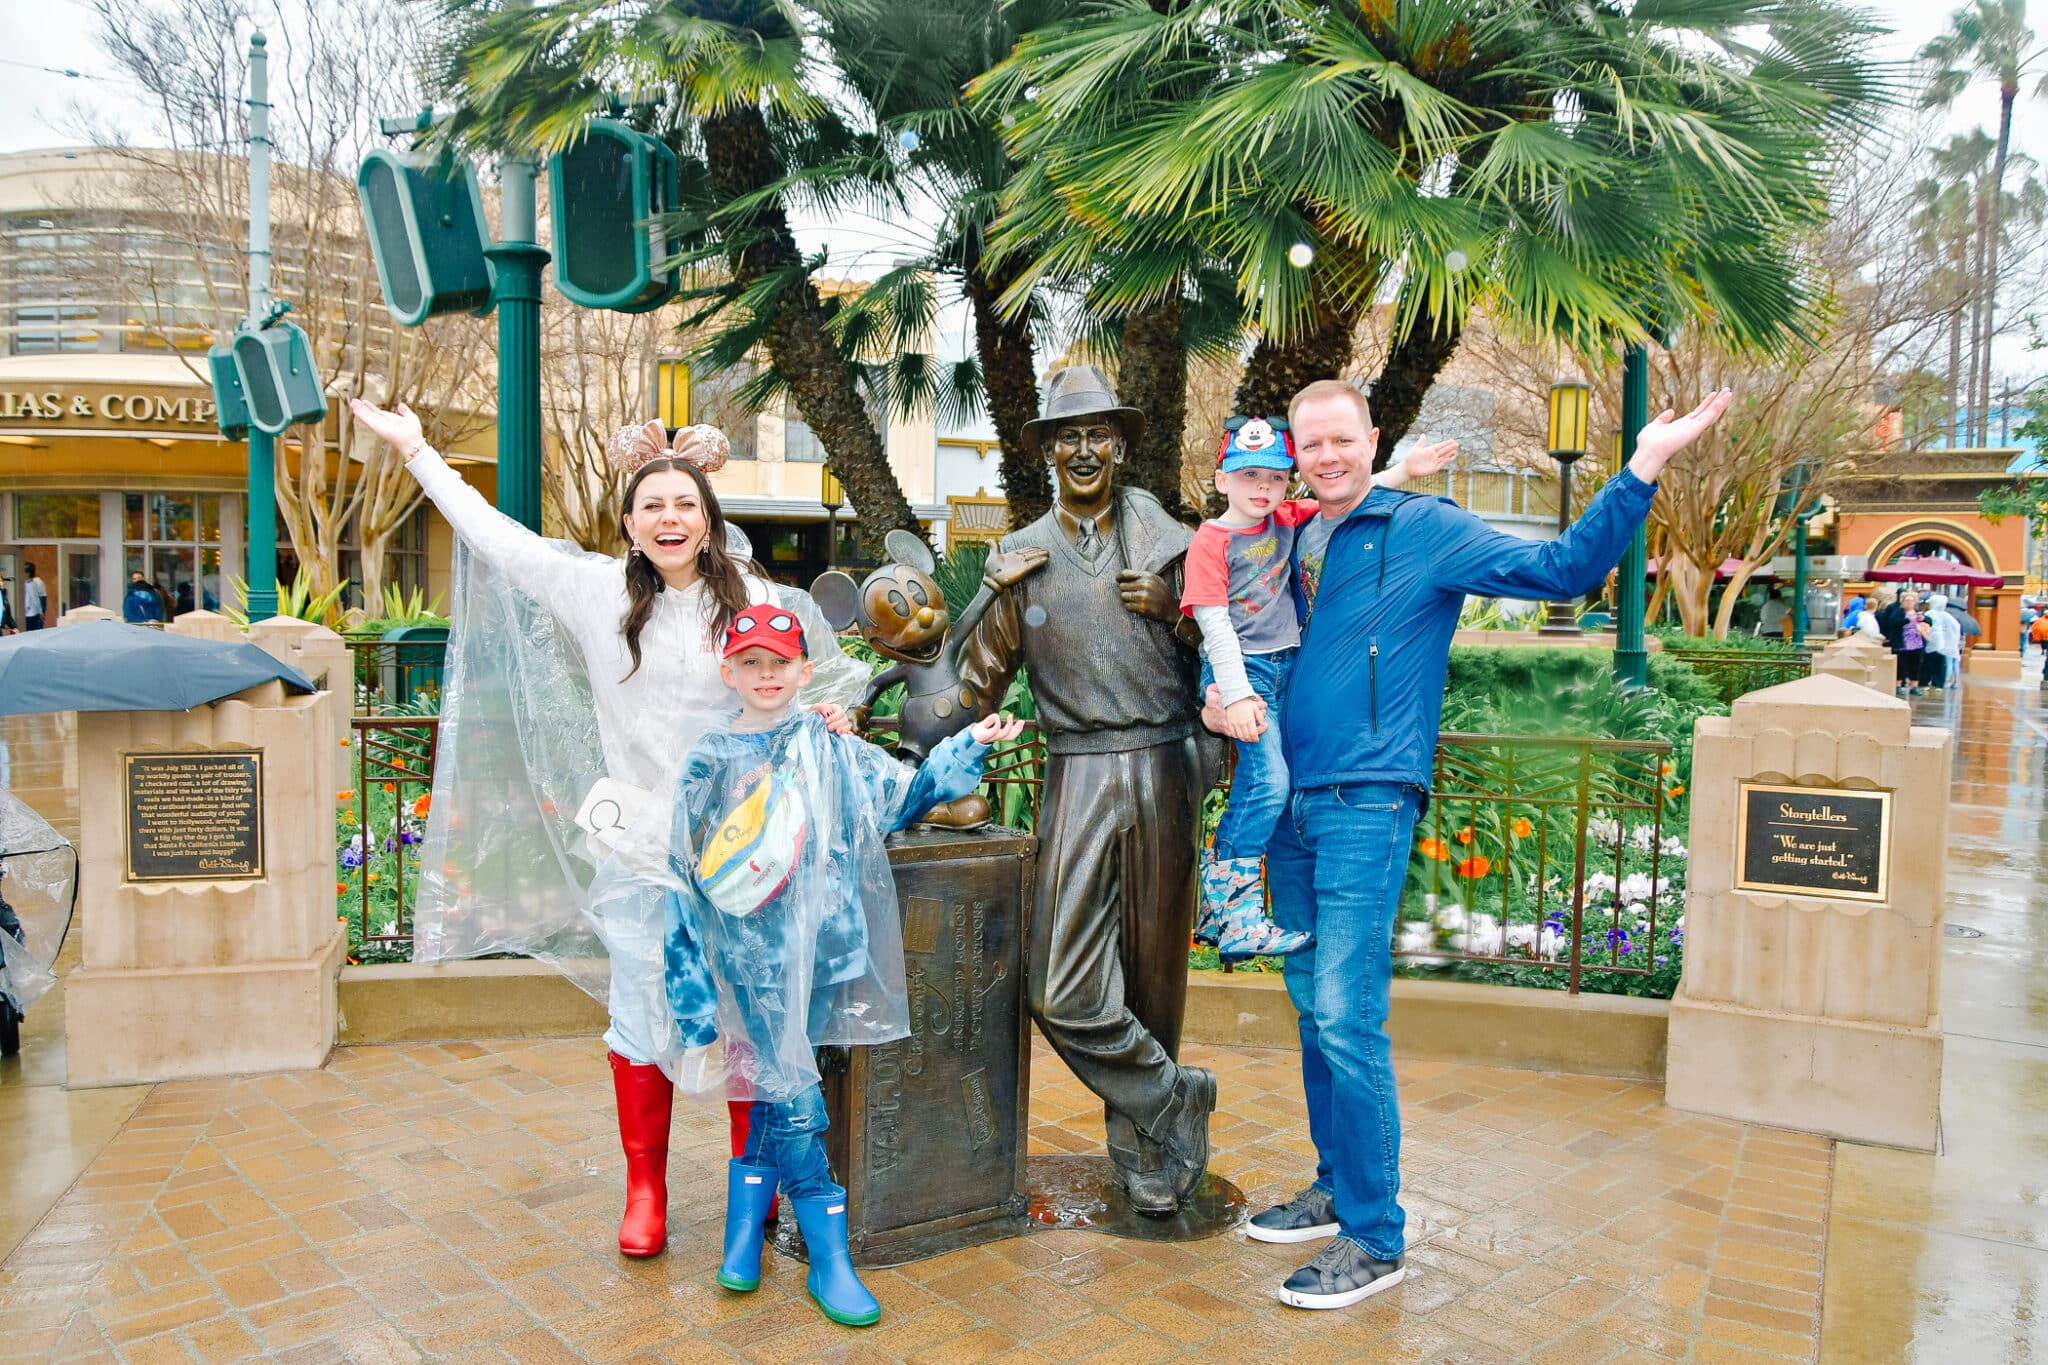 Disneyland in the Rain: Tips and Guide to Disneyland on a Rainy Day